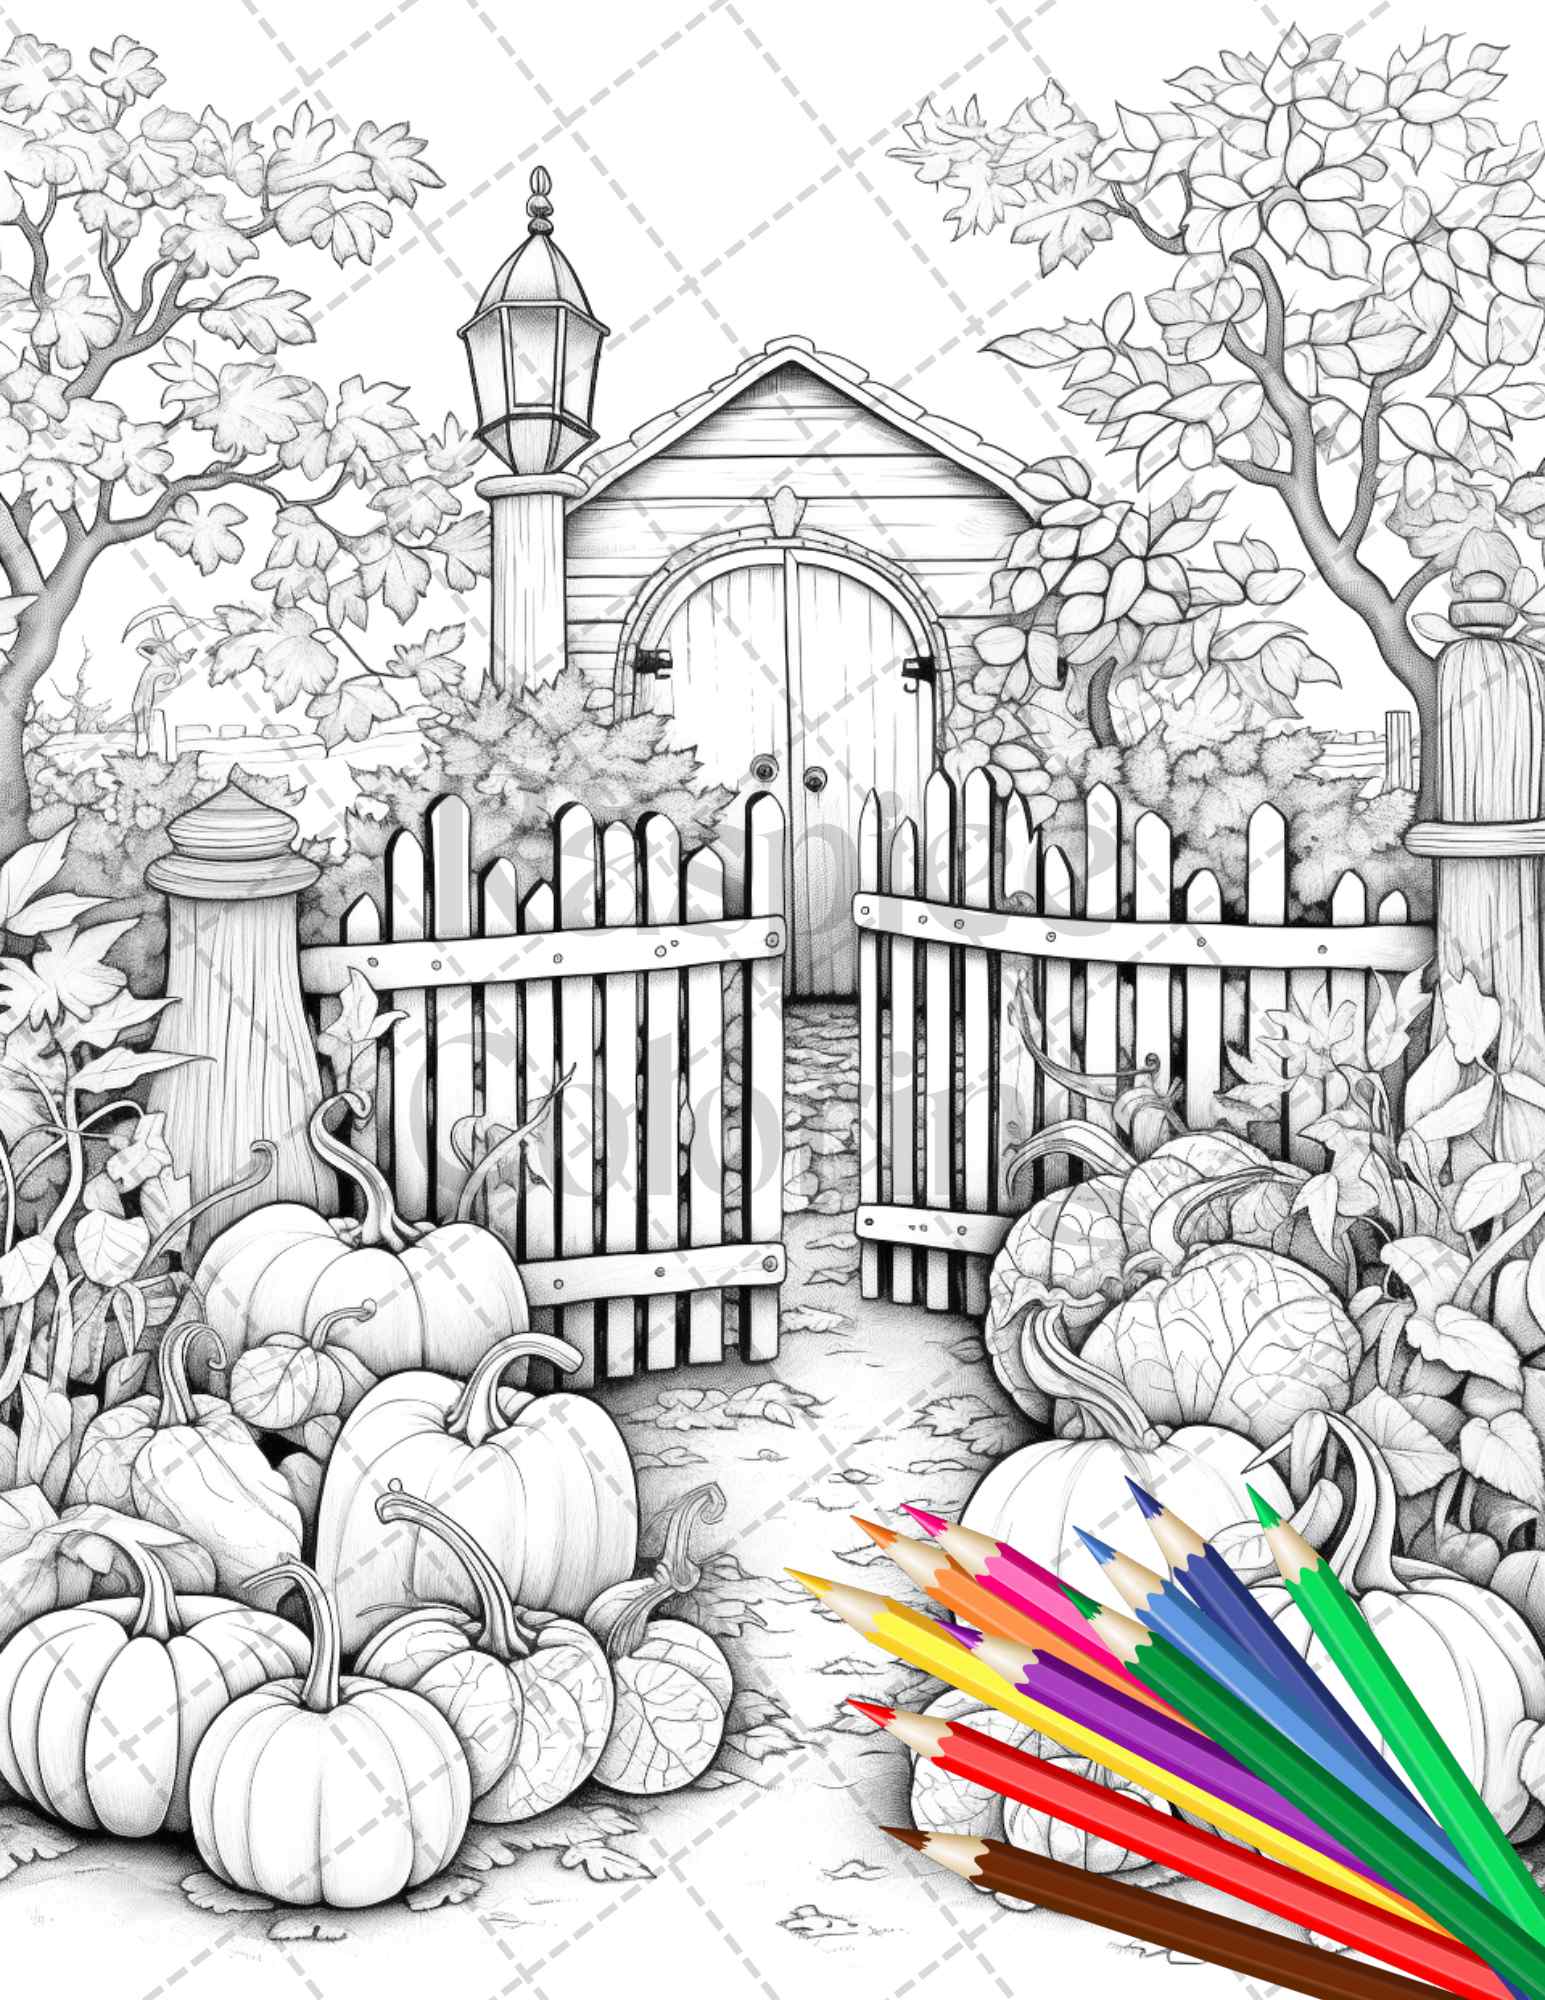 Pumpkin Garden Scenery Grayscale Coloring Pages Printable for Adults, PDF File Instant Download - raspiee